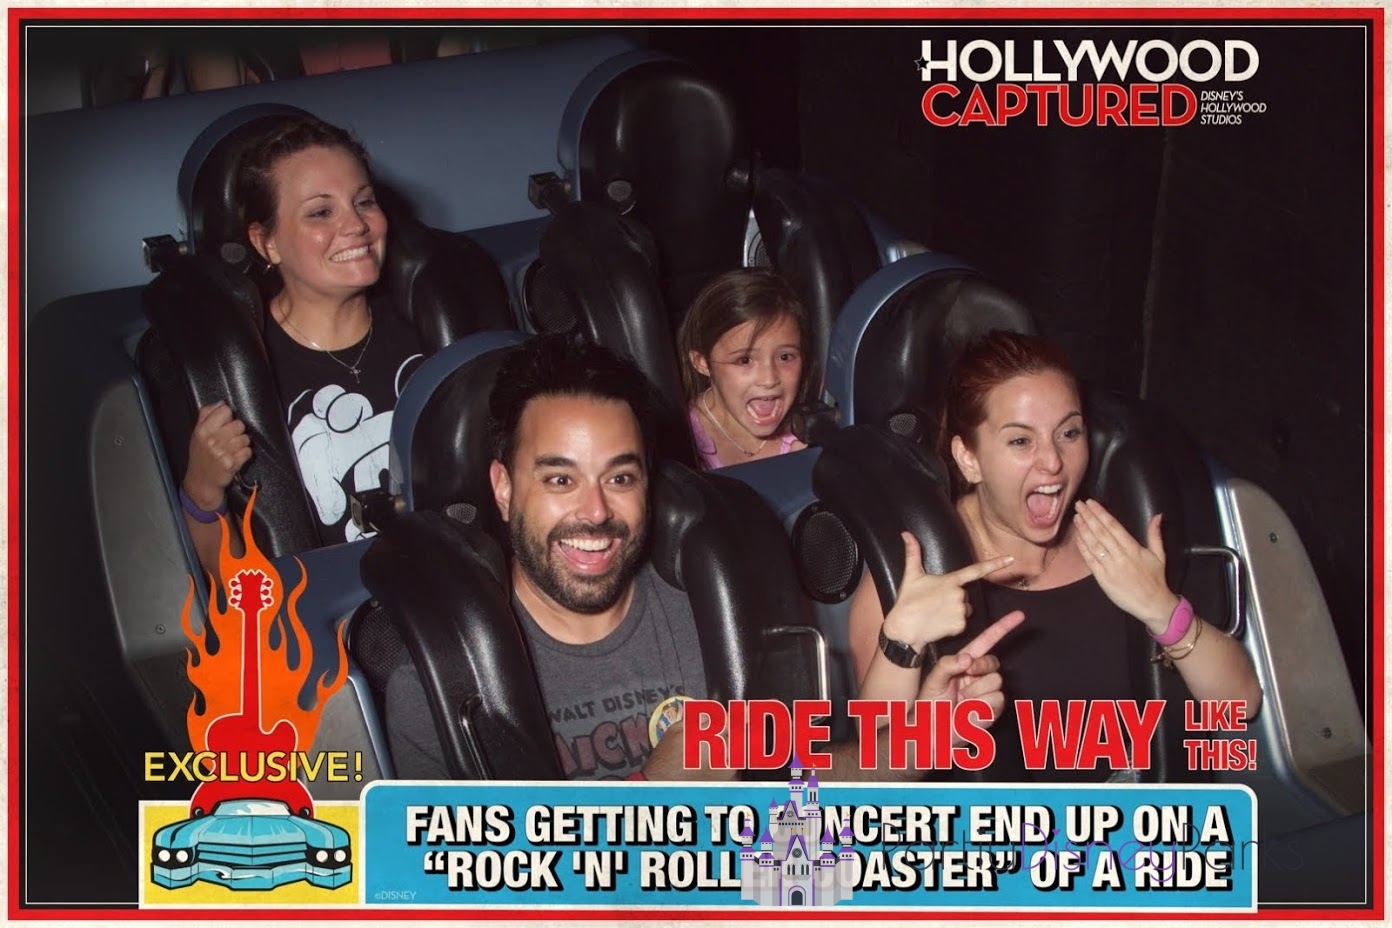 photopass-carlos-and-nath-rock-n-rollercoaster-新婚夫婦